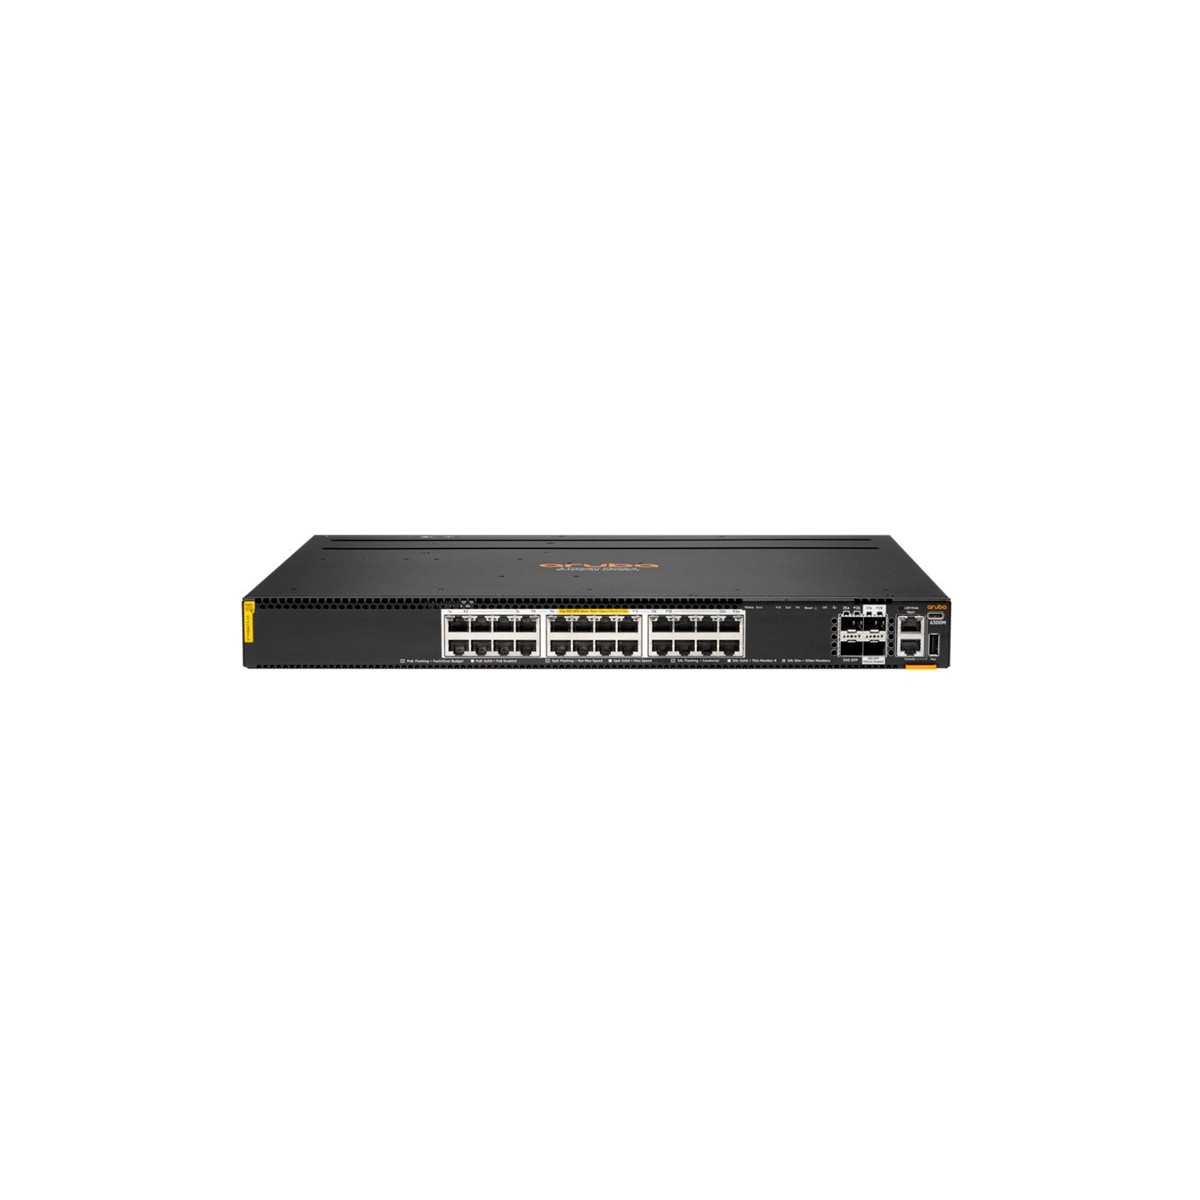 HPE a Hewlett Packard Enterprise company R8S89A - Managed - 10G Ethernet (100-1000-10000) - Power over Ethernet (PoE)